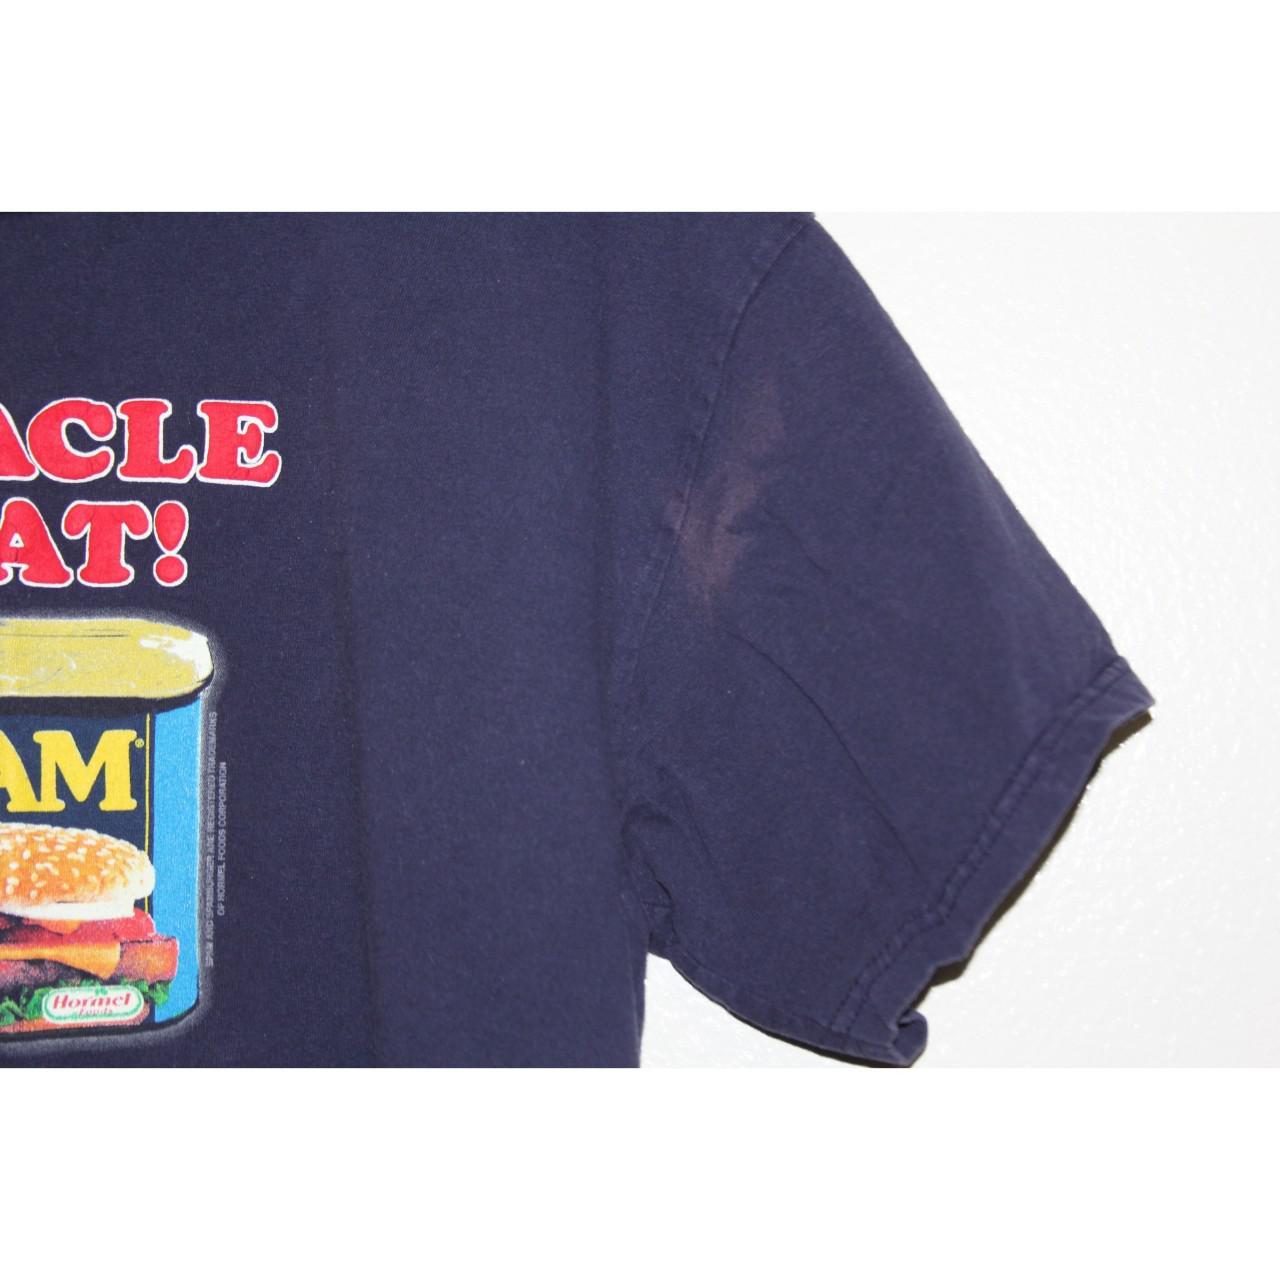 Product Image 3 - Vintage Spam Tee
Sz. Large
Condition -